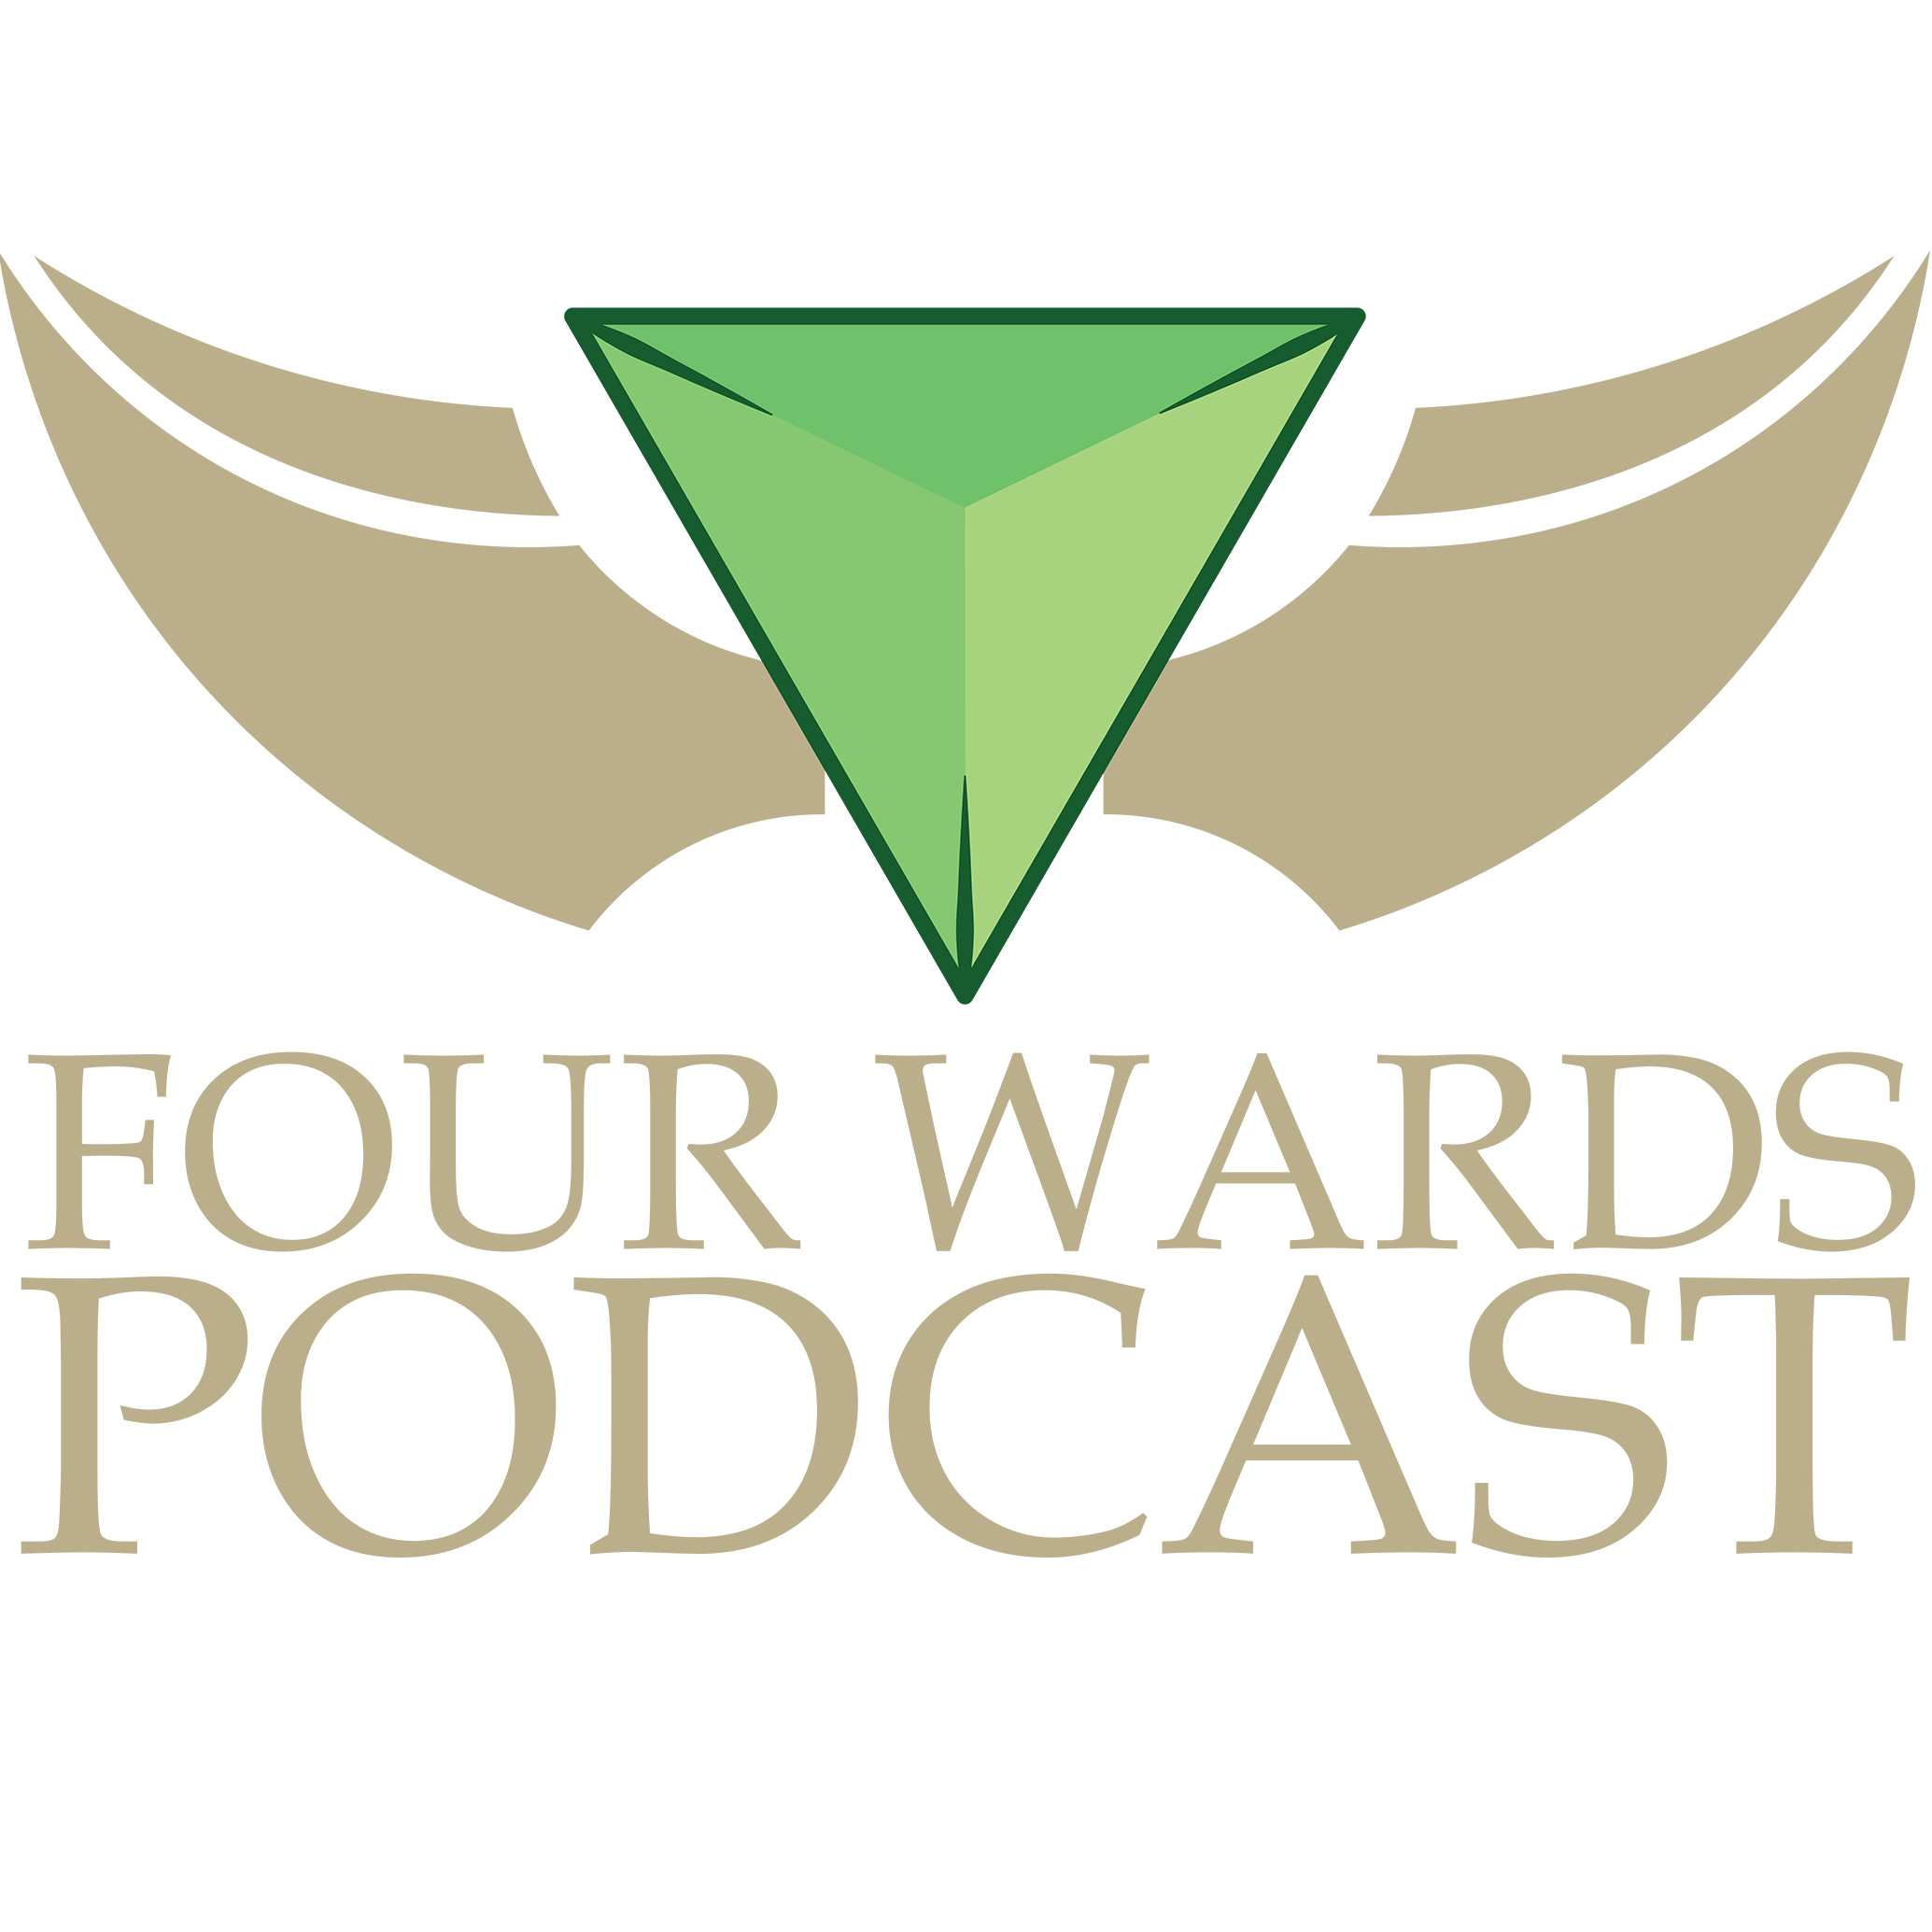 The Four Wards Podcast - Episode 433: A Modest Patch For Preventing the Children of Low ELO From Being a Burden